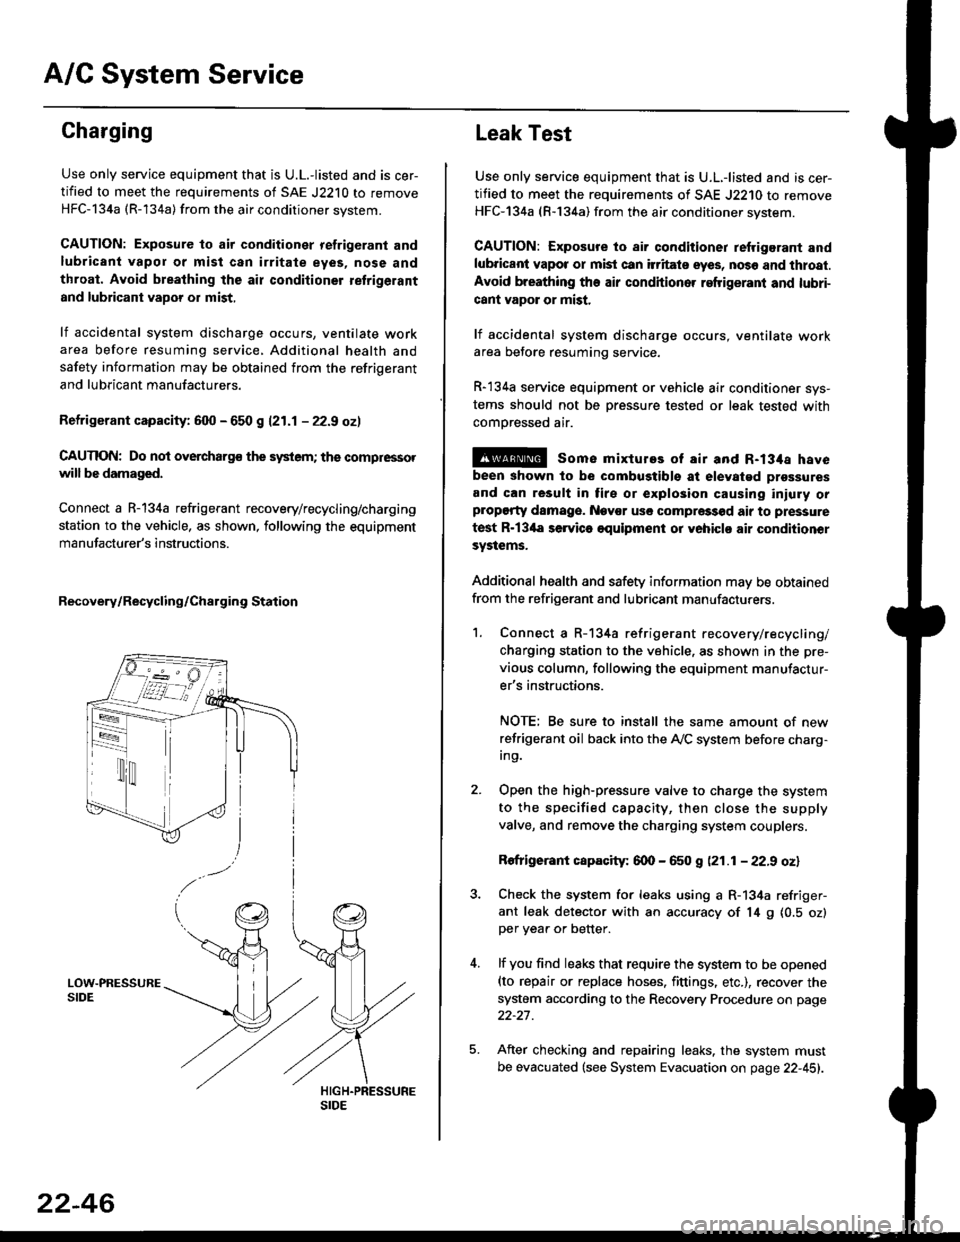 HONDA CIVIC 1997 6.G Workshop Manual A/C System Service
Charging
Use only service equipment that is U.L.-listed and is cer-
tified to meet the requirements of SAE J2210 to remove
HFC-134a (R-134a) from the air conditioner system.
CAUTION